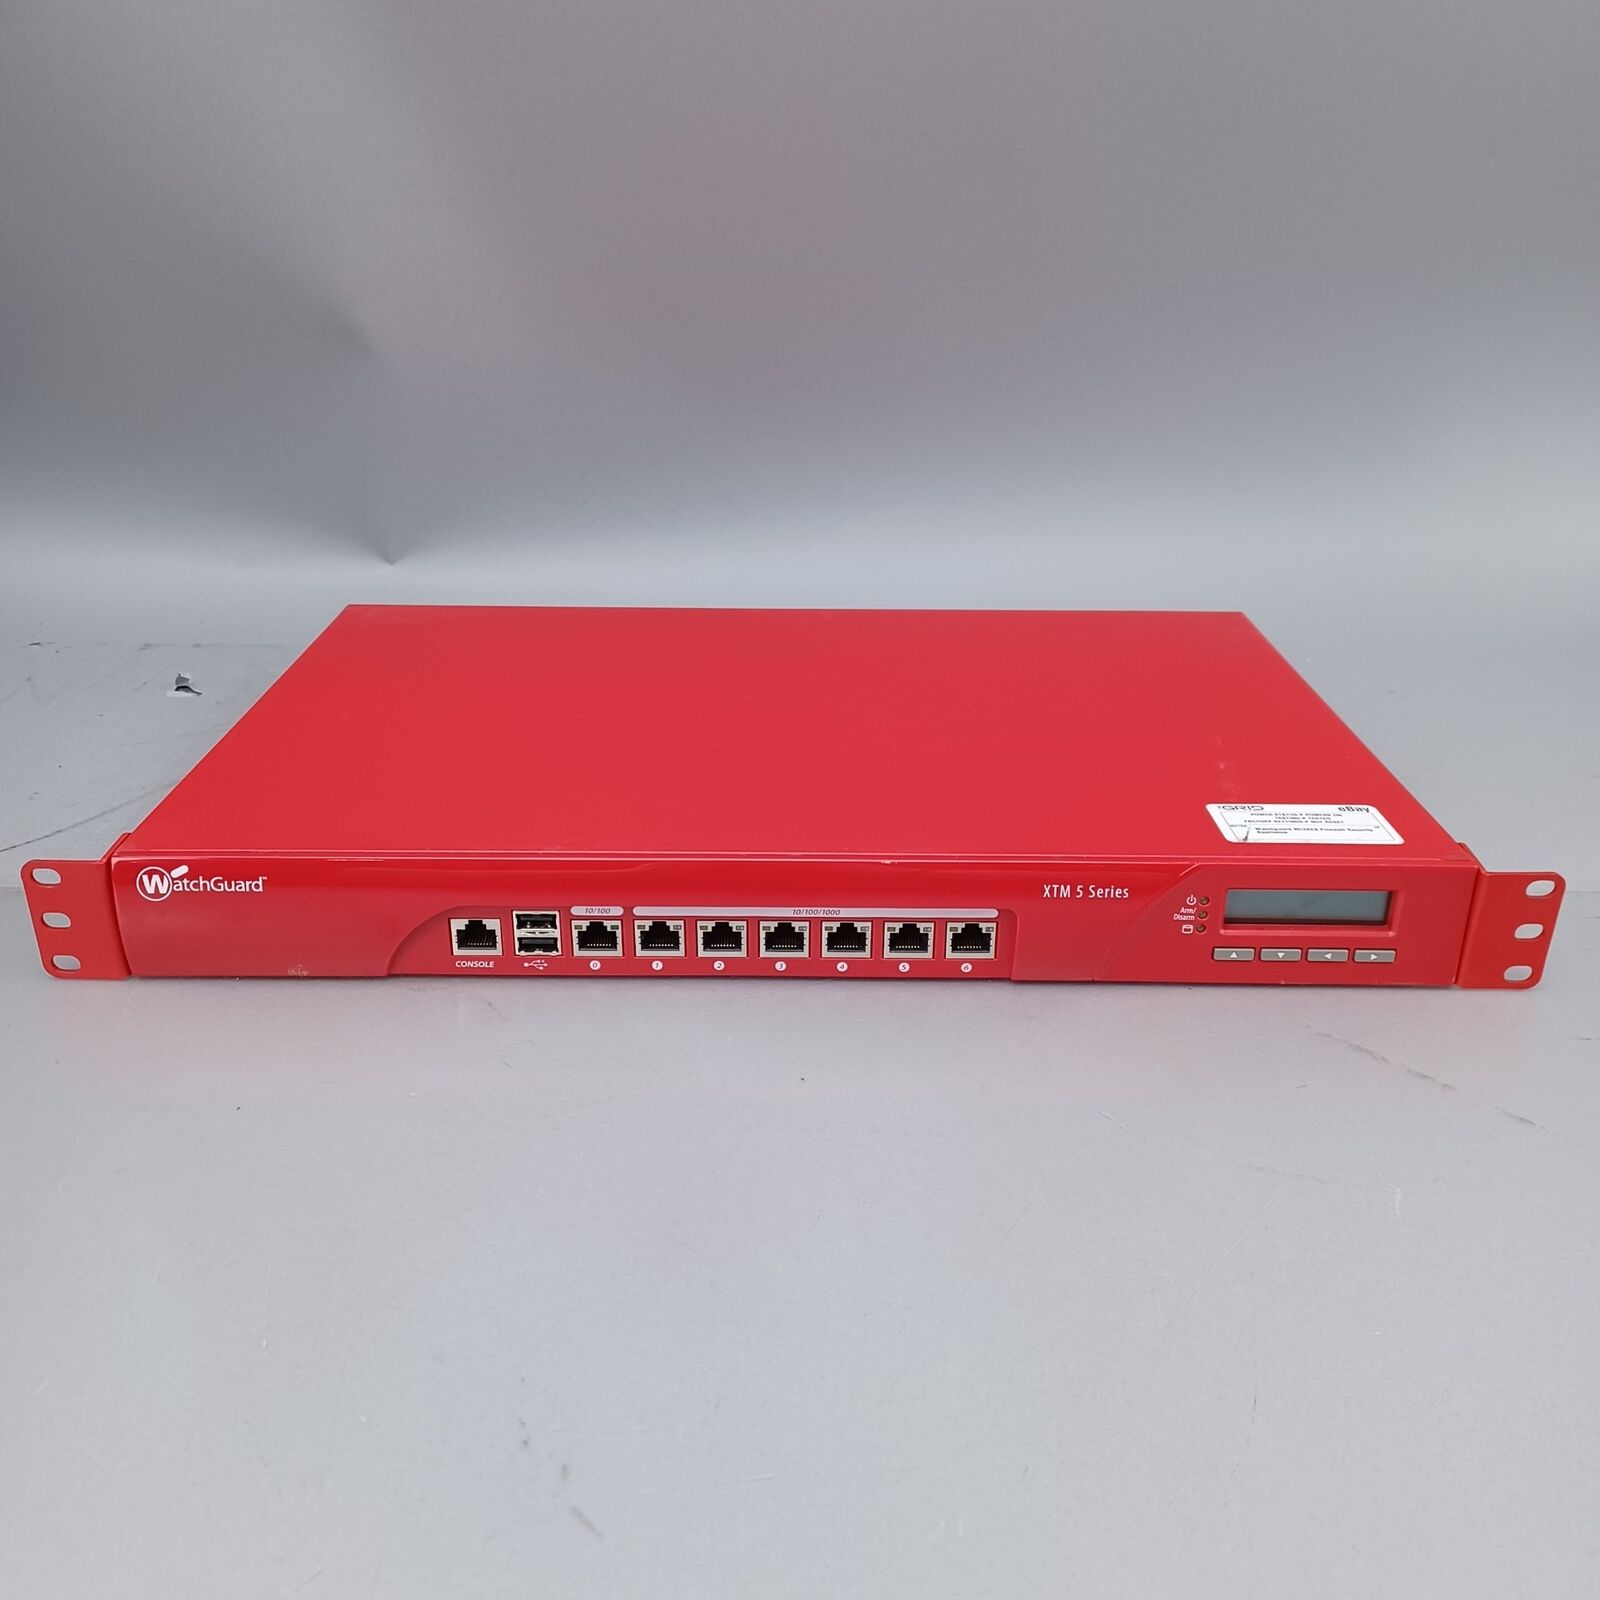 WatchGuard XTM 5 Series NC2AE8 Firewall Security Device - Tested